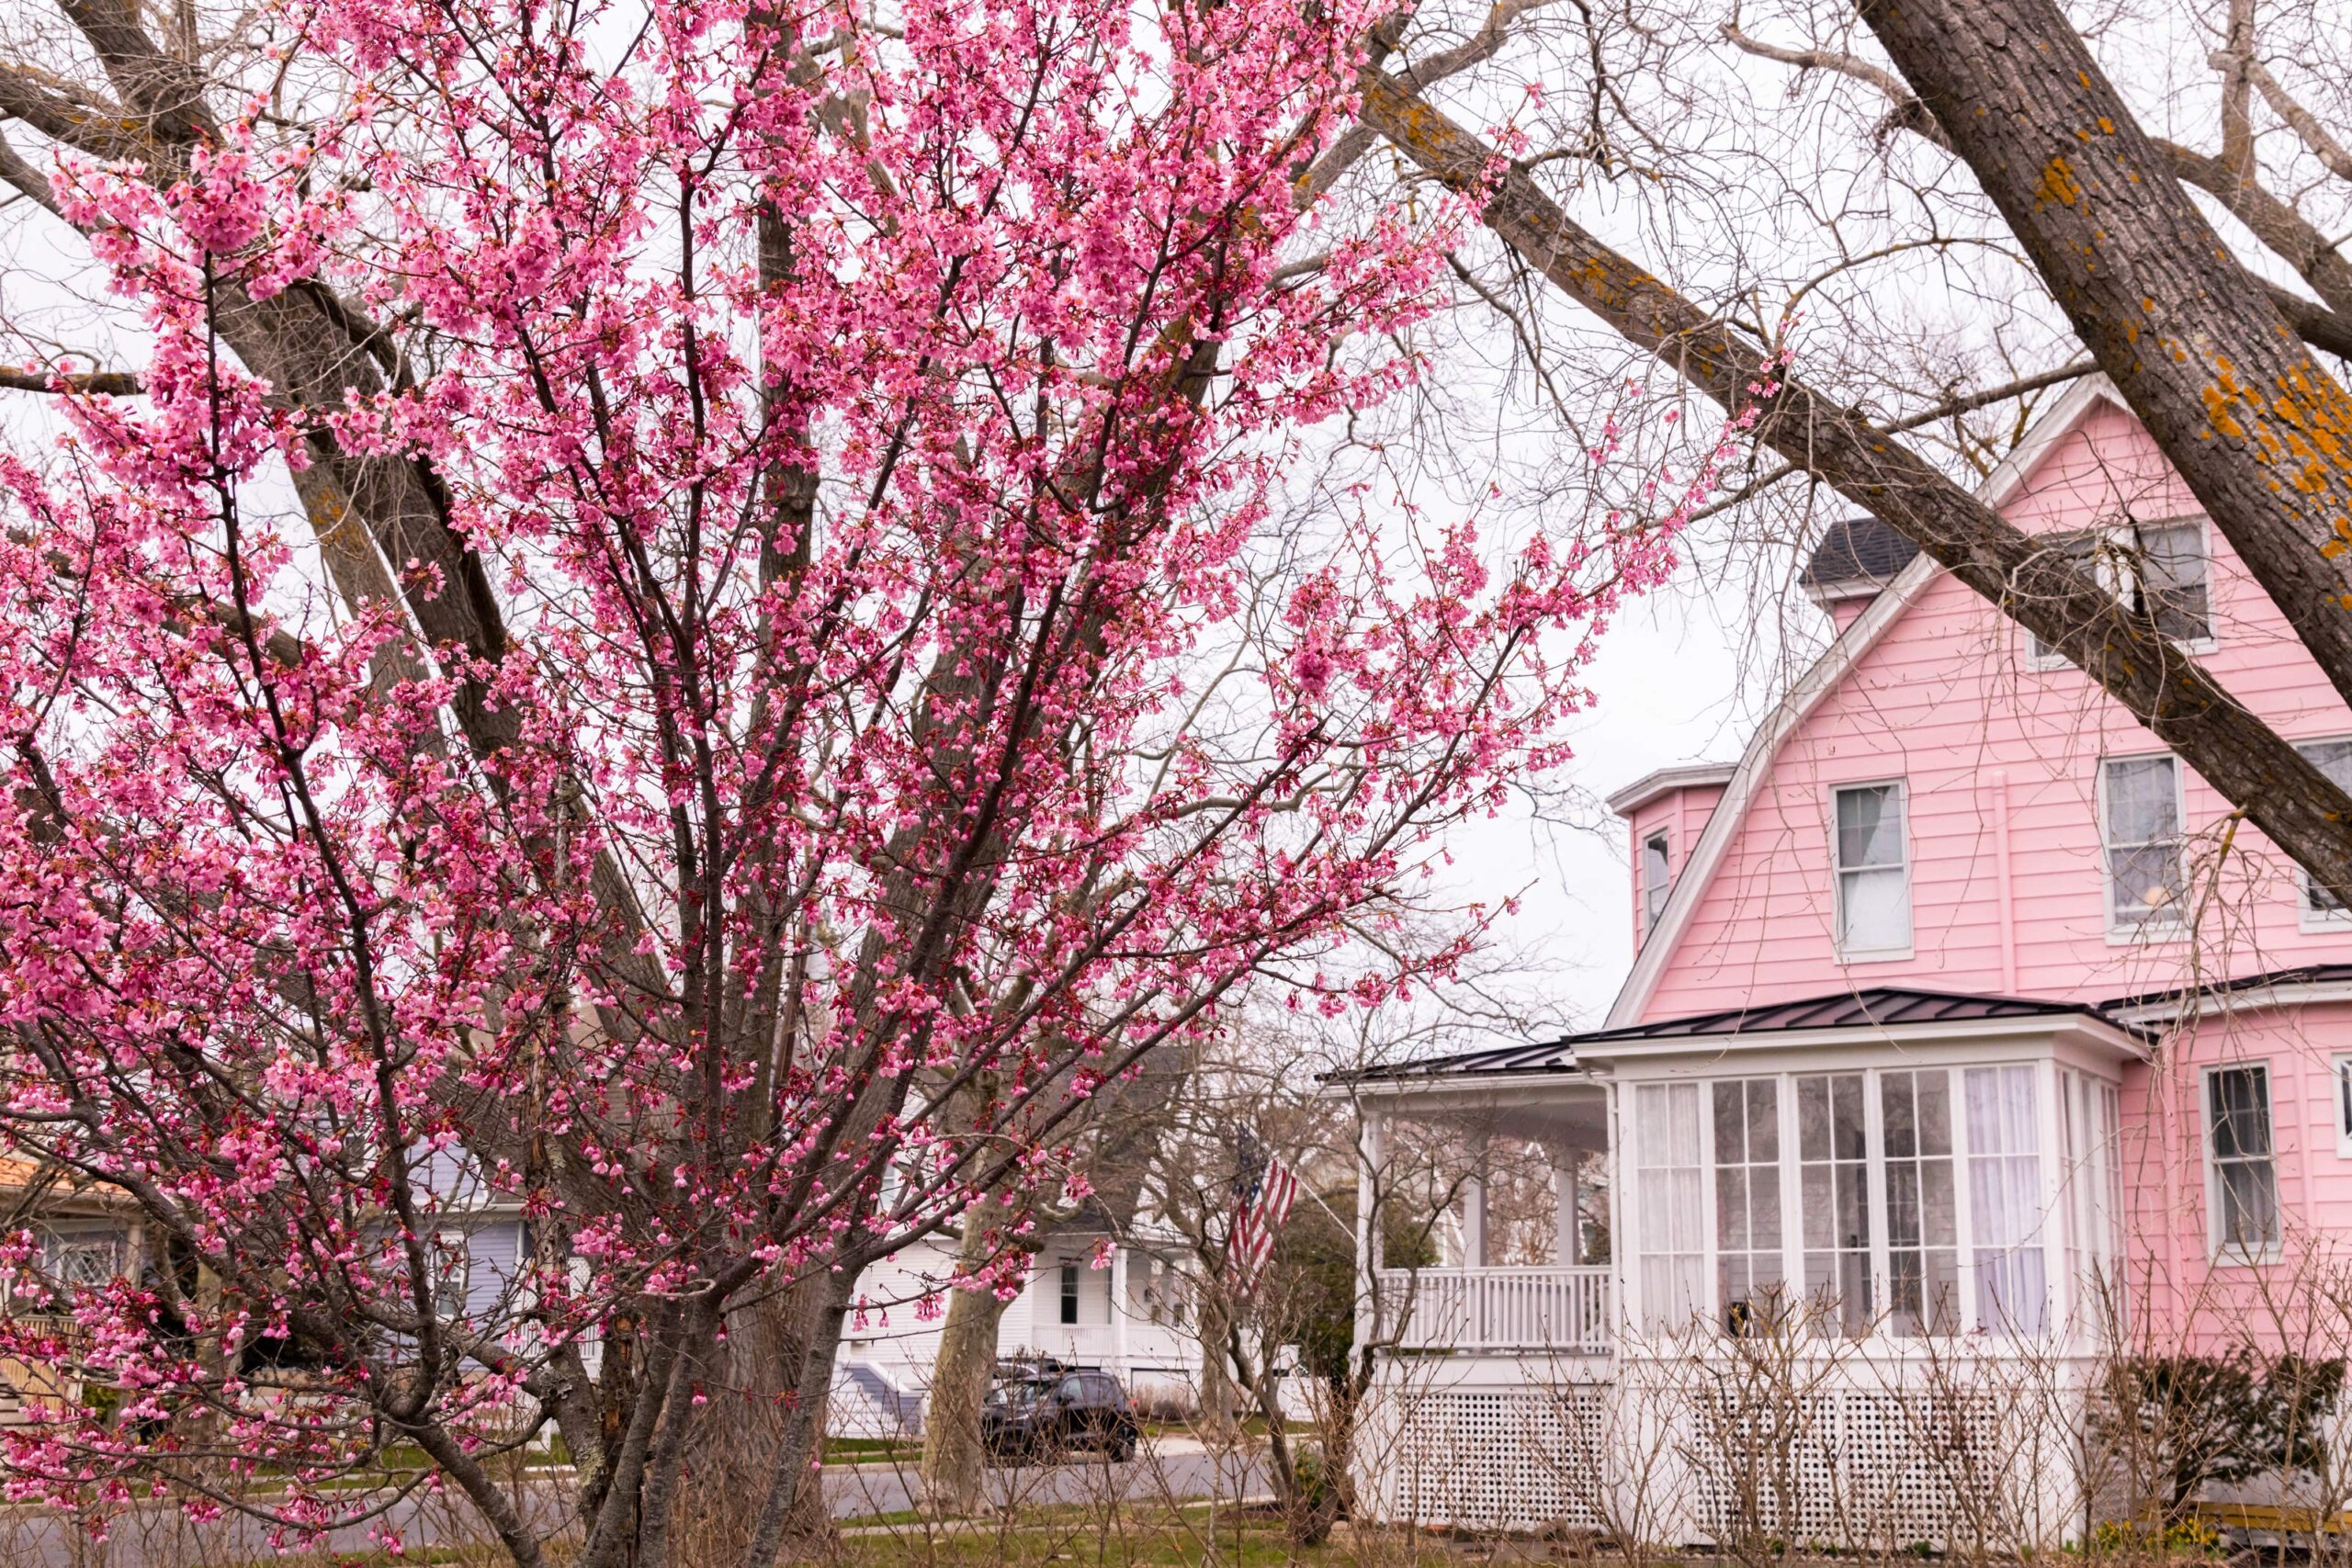 A pink cherry blossom tree starting to bloom in front of a pink Victorian house on a cloudy day